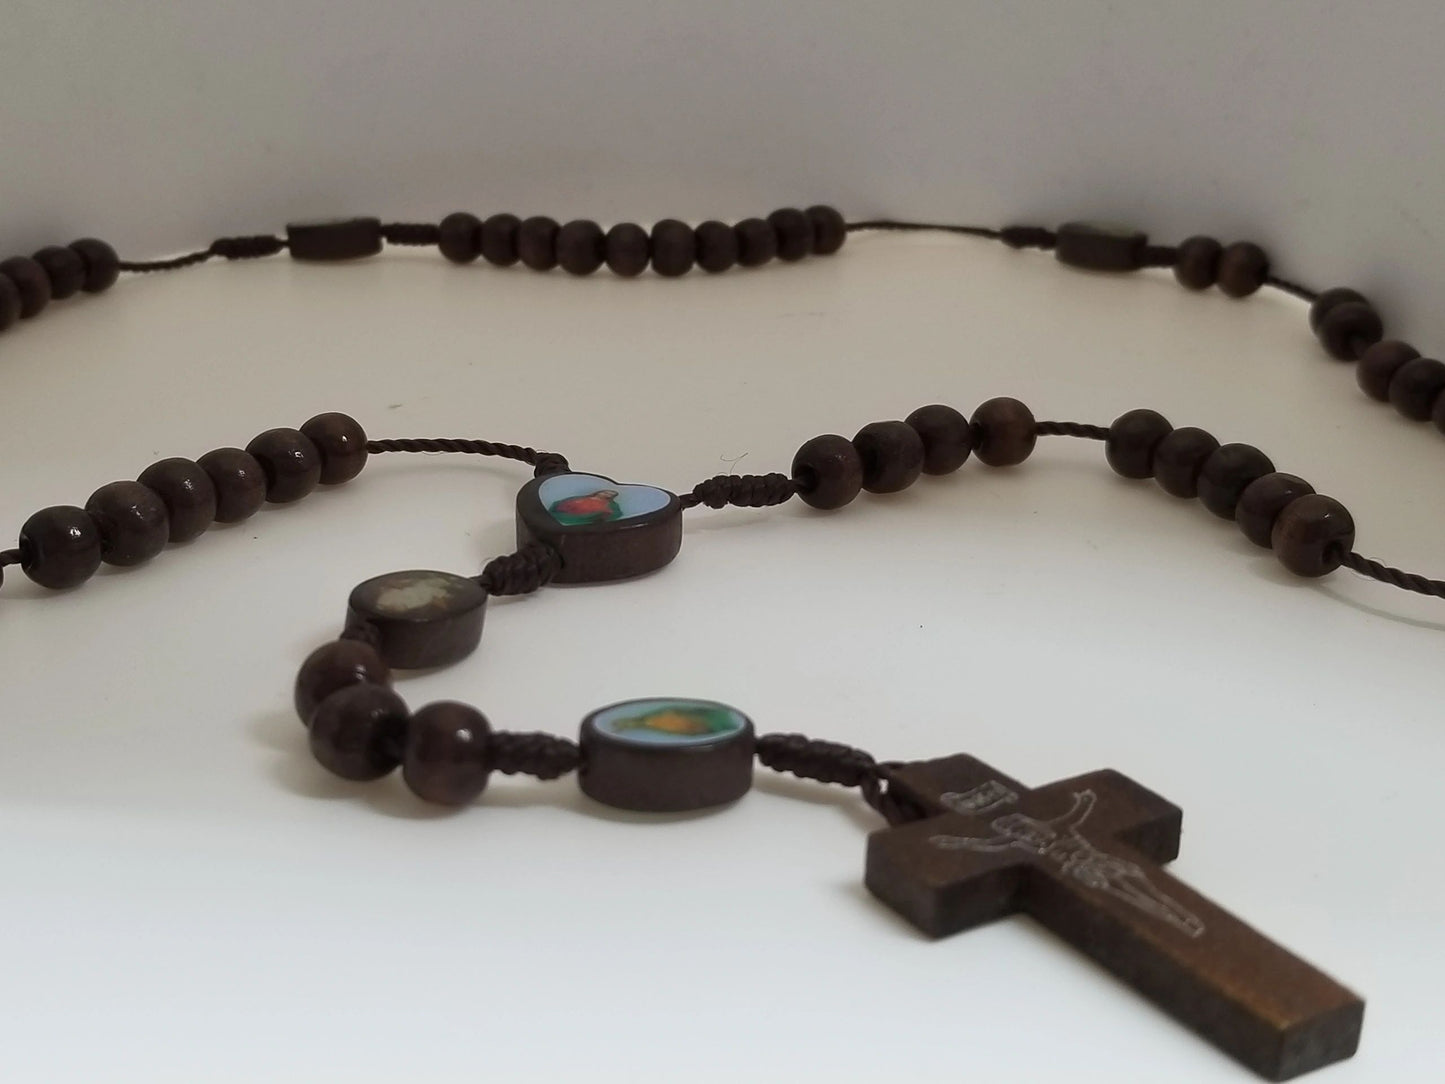 Rosary-style Wooden Crucifix w/ Beaded Cord Necklace